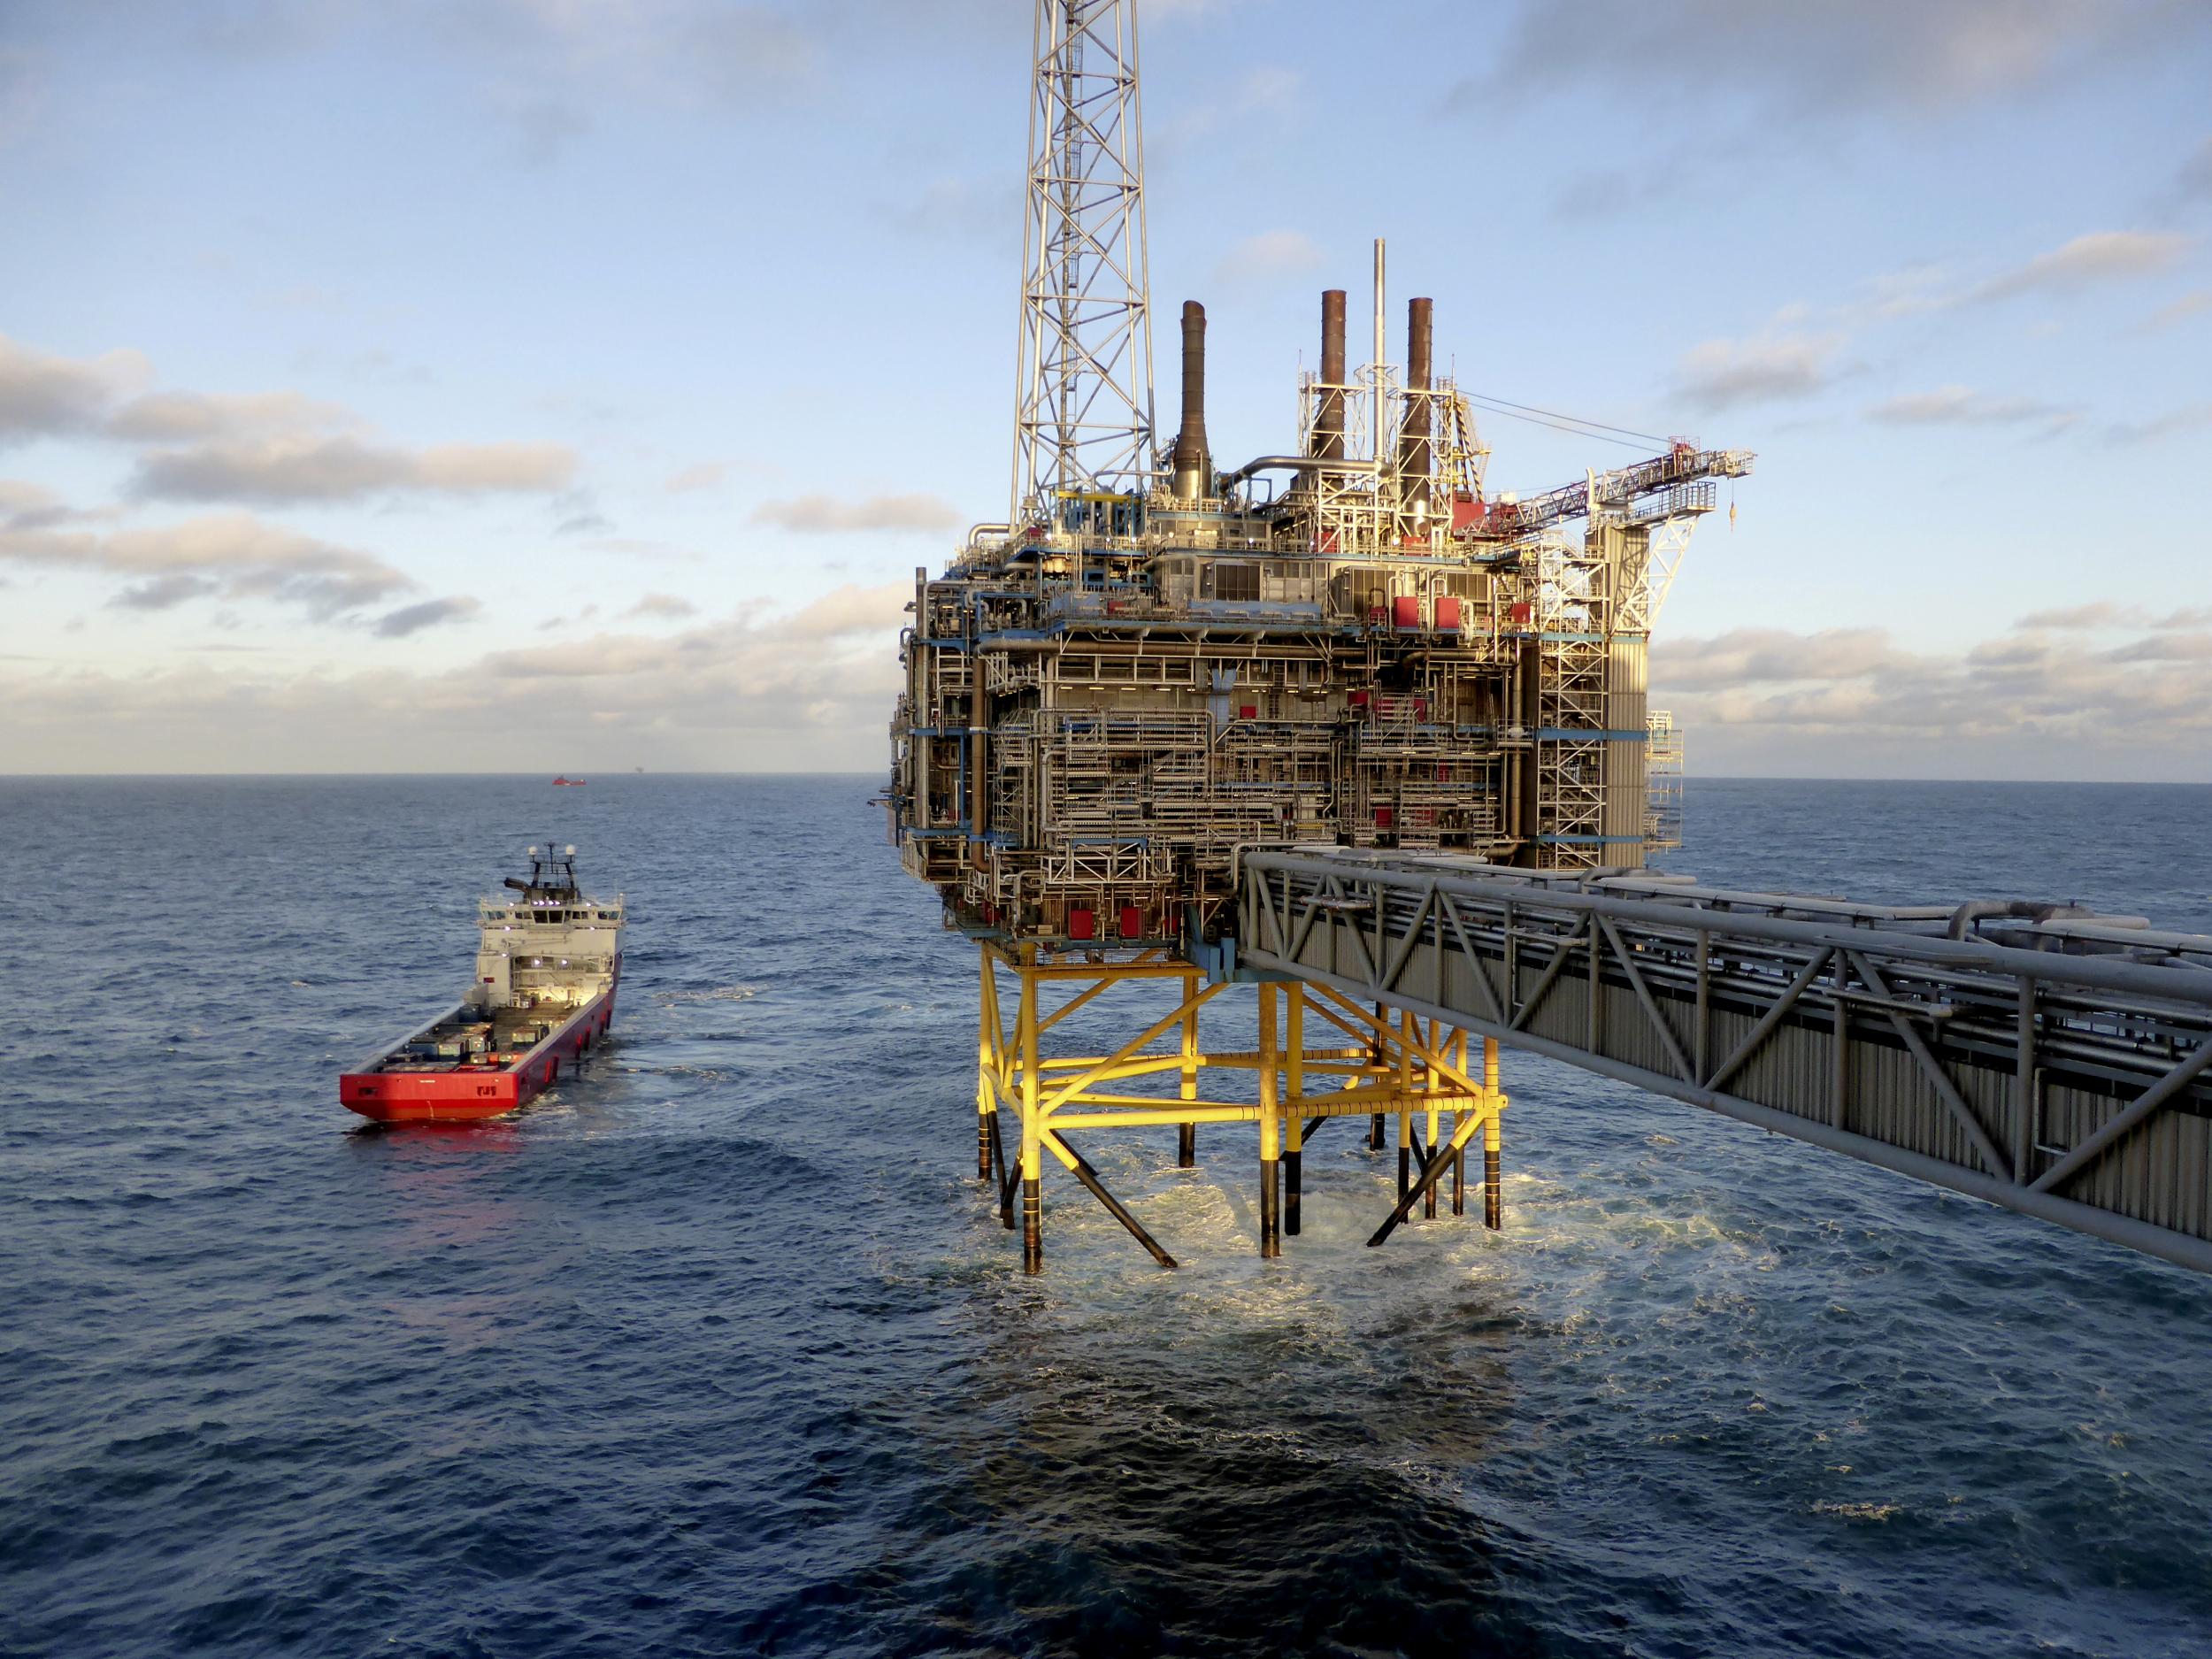 Norway is Scandinavia’s richest country and western Europe’s biggest oil and gas exporter